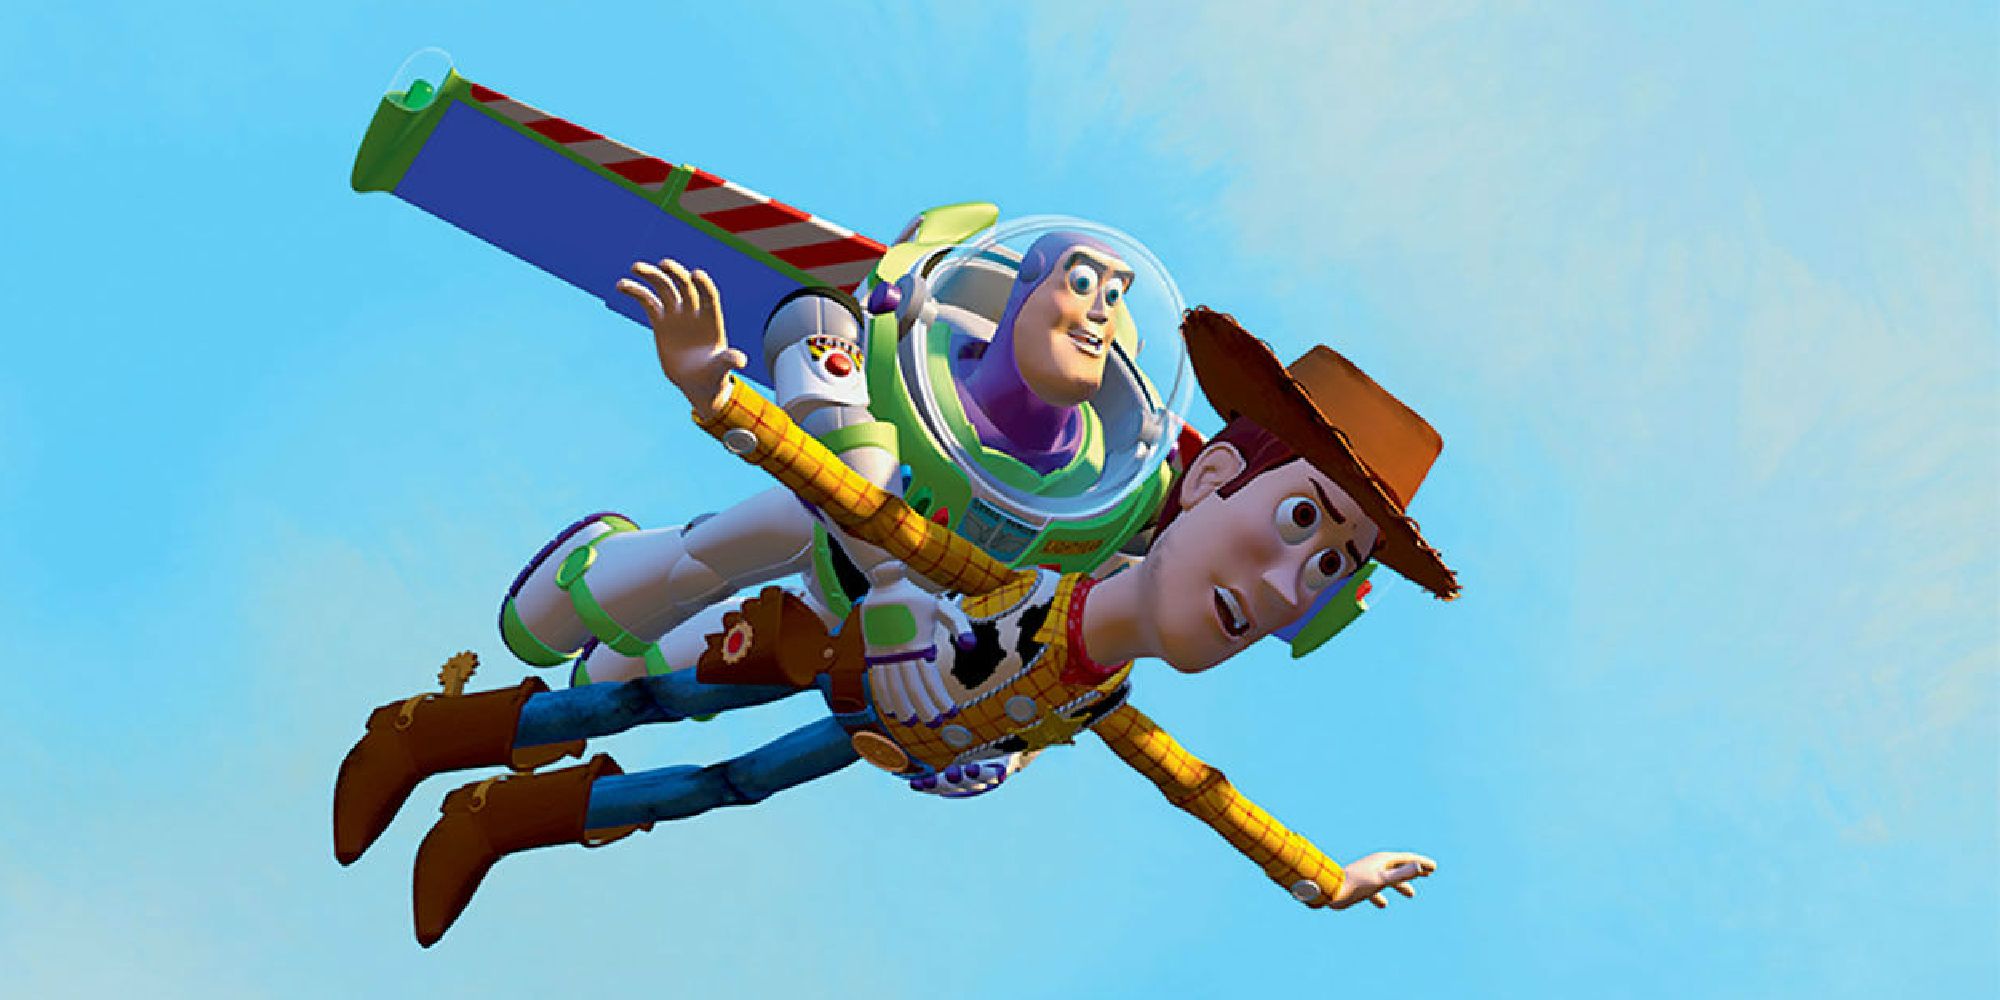 Buzz holding Woody as they fly towards Andy's moving truck